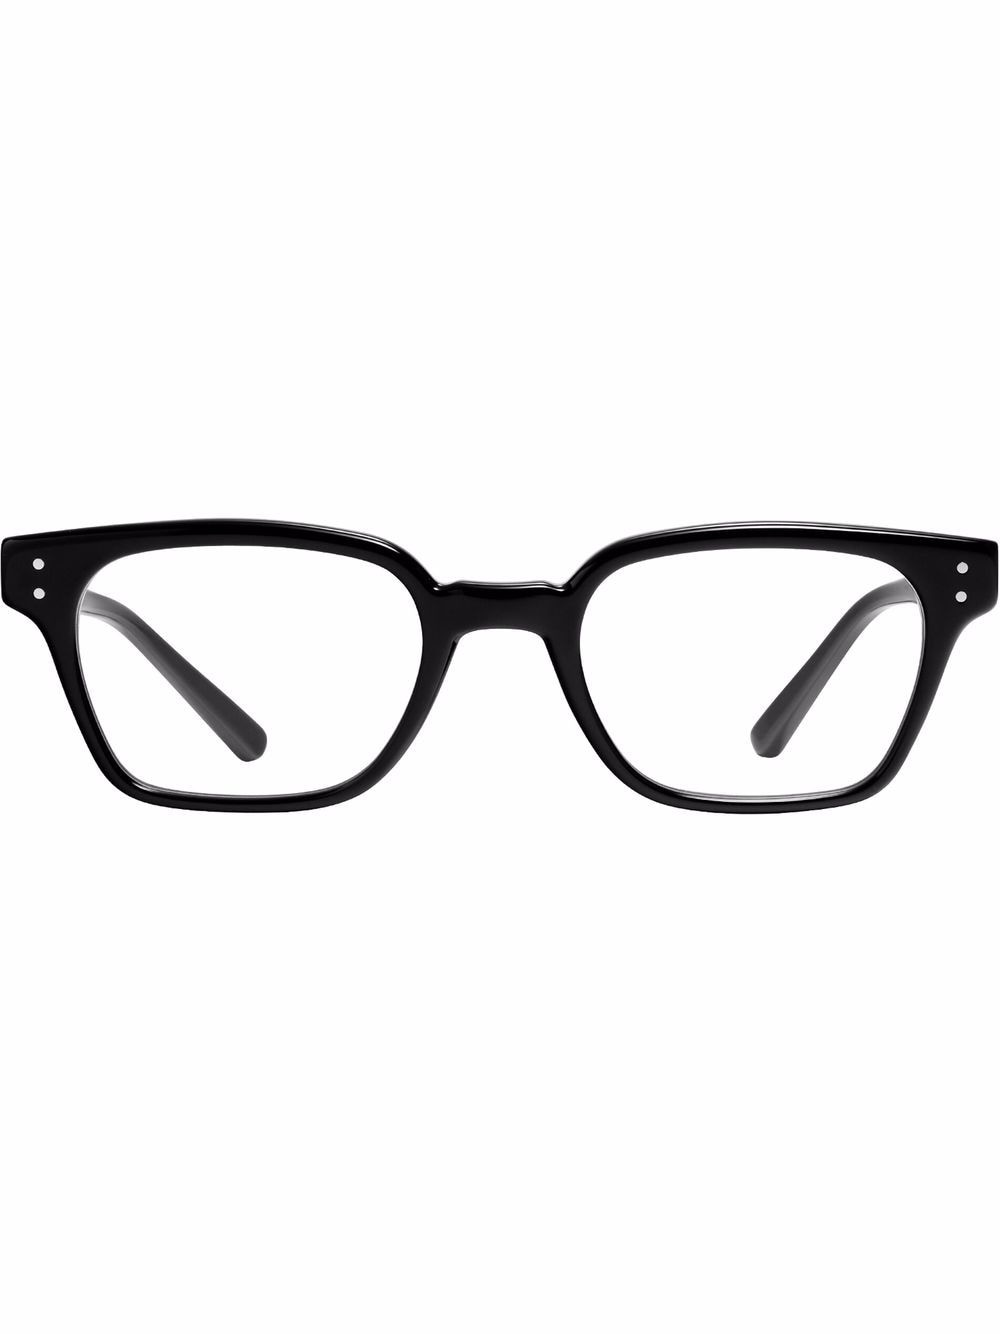 Gentle Monster Leroy 01 square-frame Glasses - Farfetch